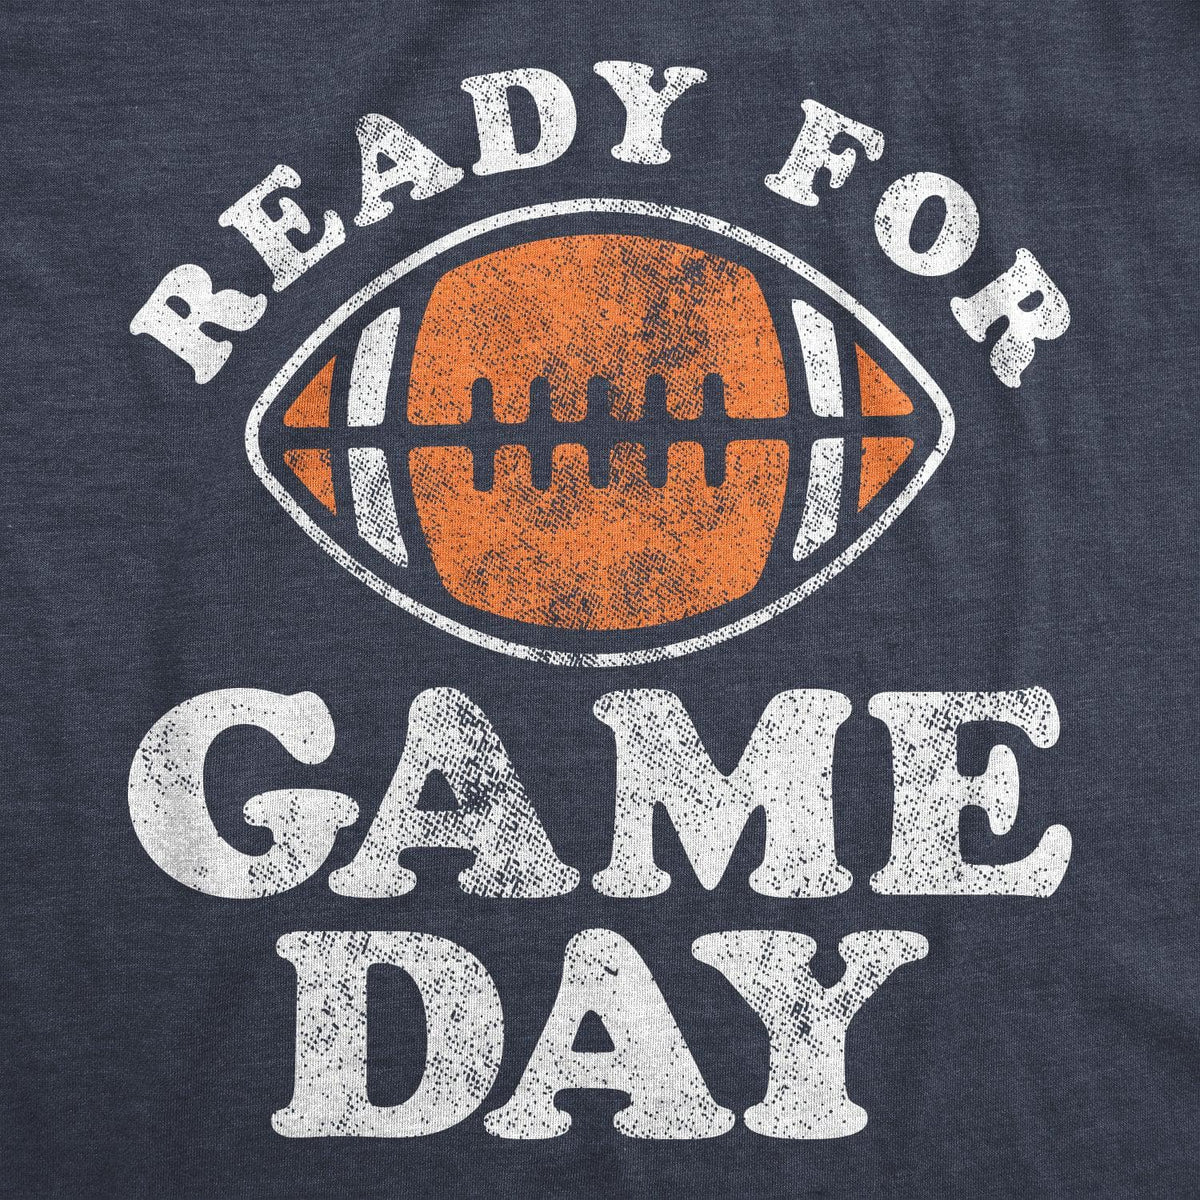 Ready For Game Day Women&#39;s Tshirt  -  Crazy Dog T-Shirts